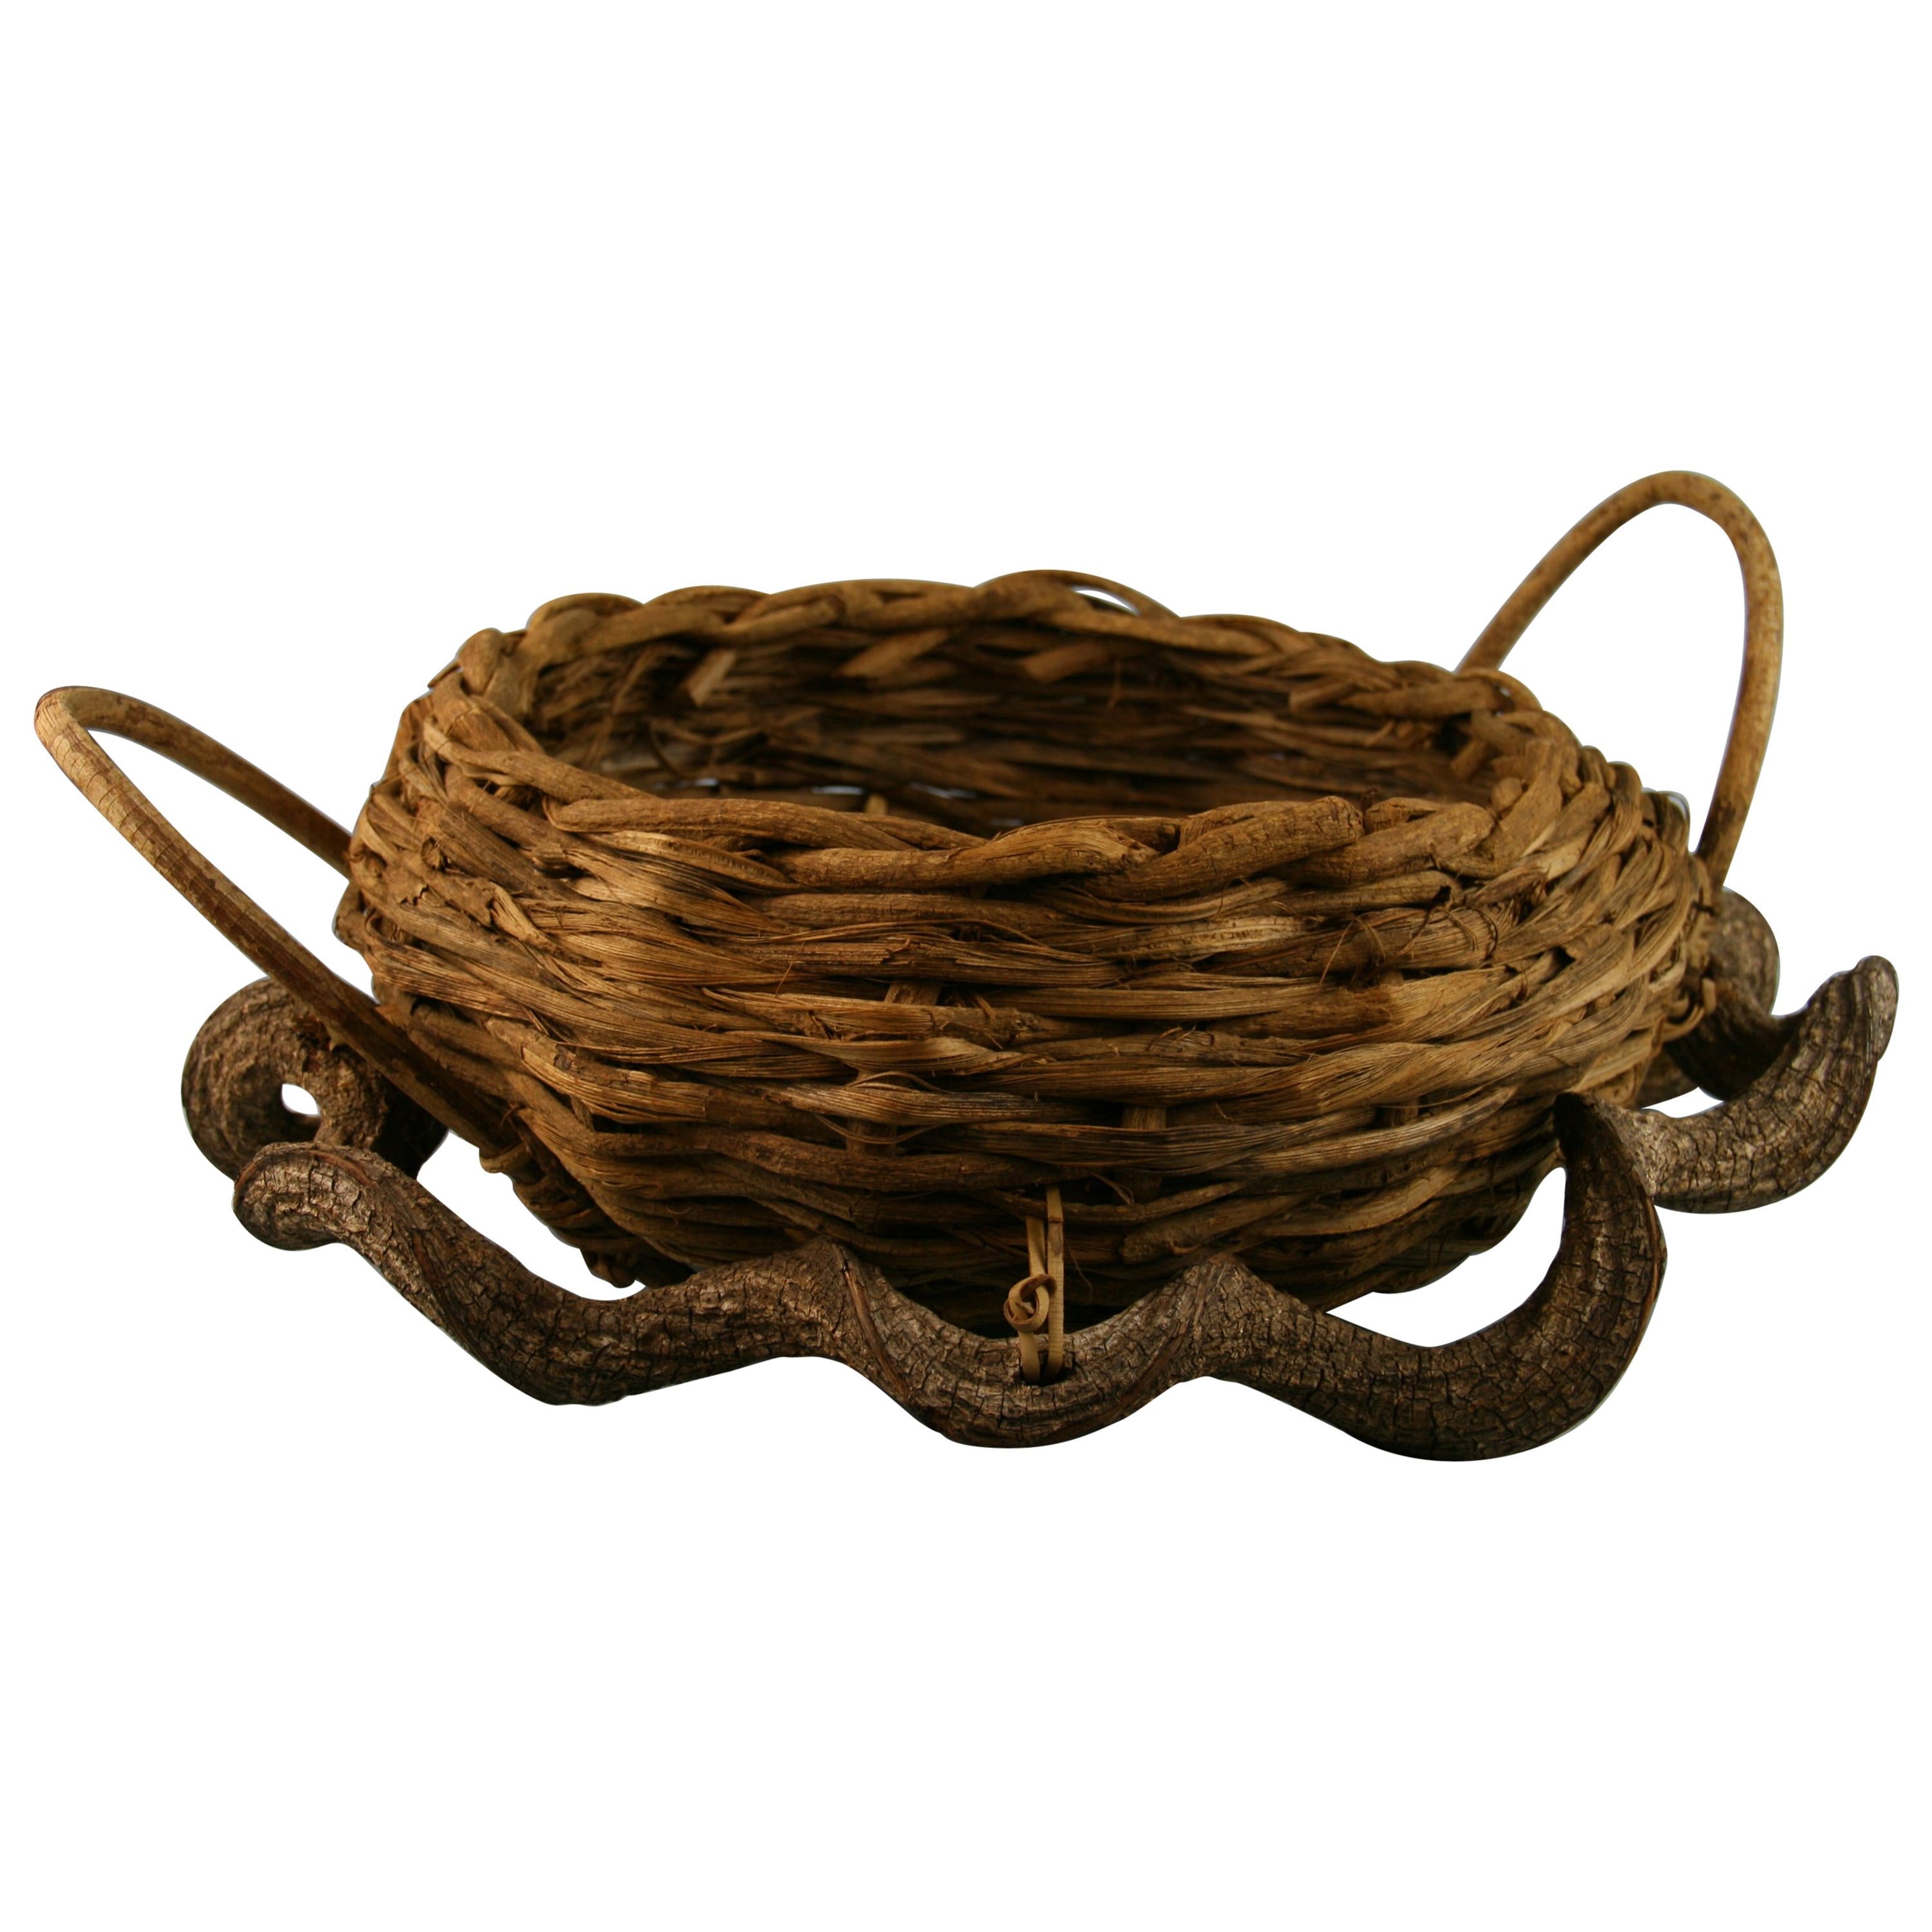 Japanese Twisted Branches and Twigs Garden Planter/Centerpiece/Folk Art  Basket For Sale at 1stDibs